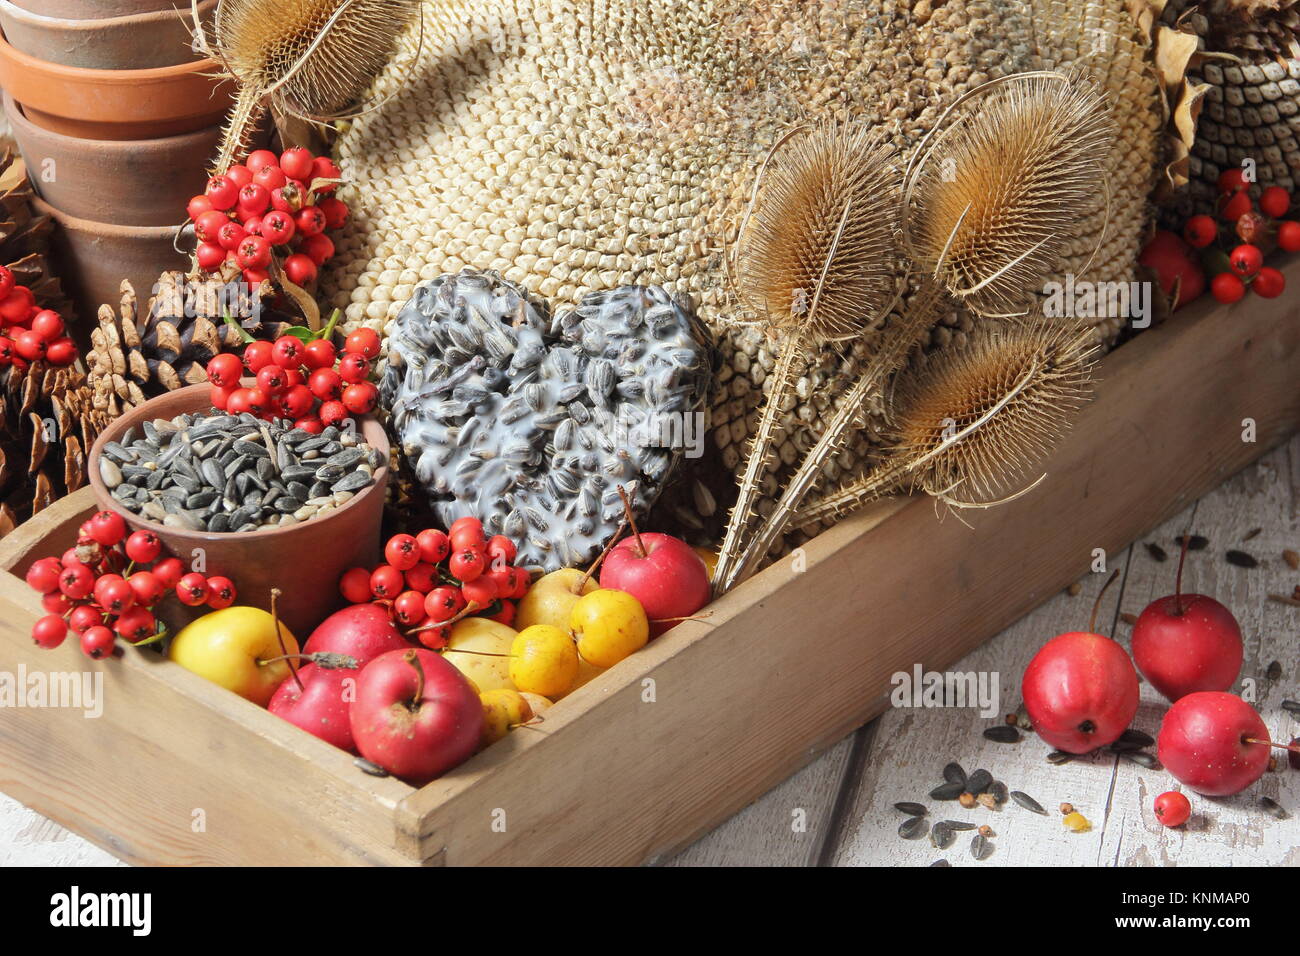 Bird food buffet ingredients including crab apples, sunflower seeds, teasel seed heads, pyracantha berries and a suet cake, gathered in a wooden tray Stock Photo